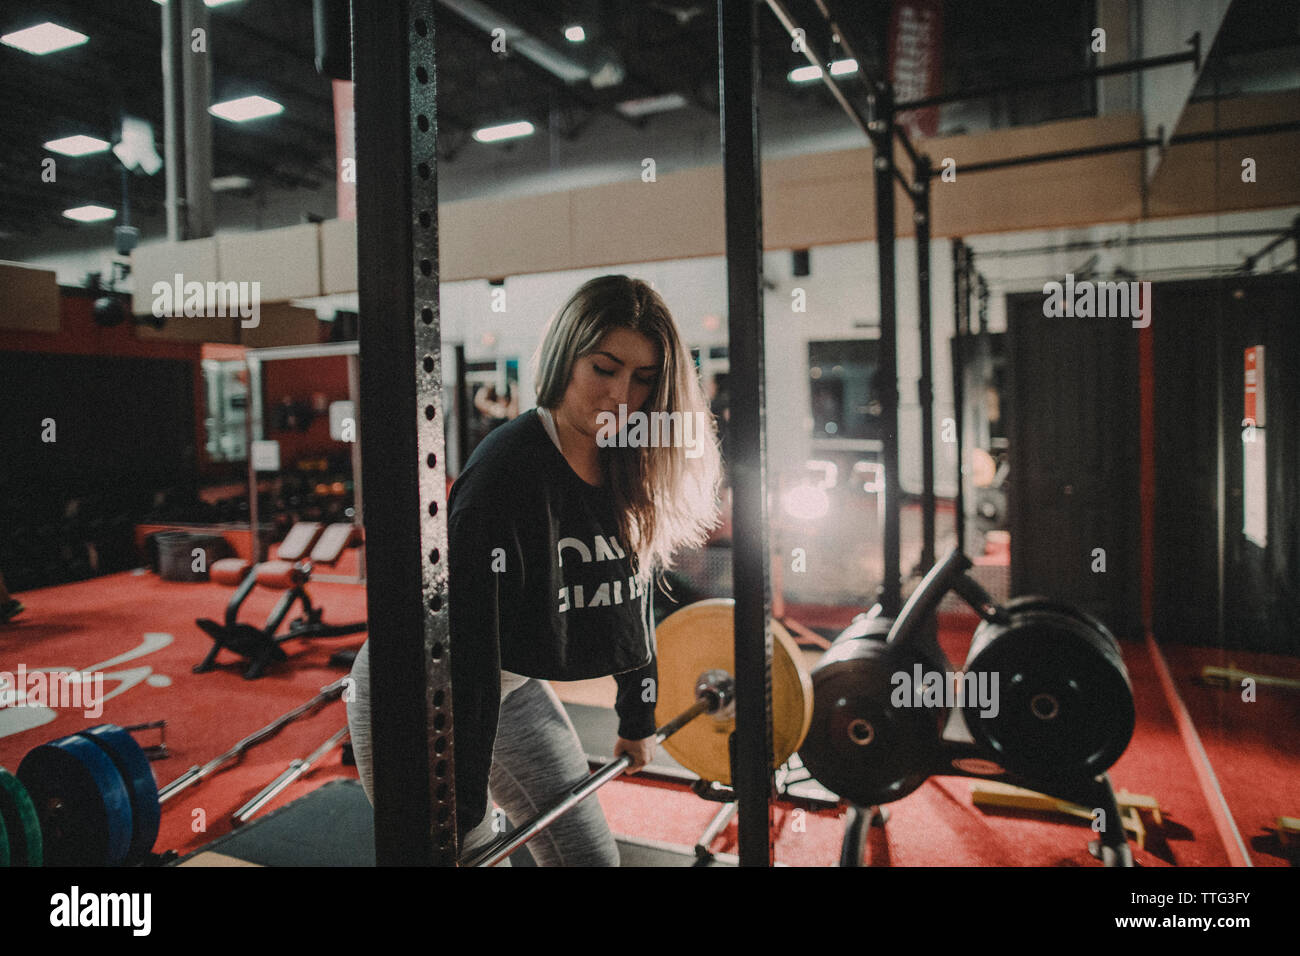 fit, attractive female working out using a barbell and squat rack Stock Photo